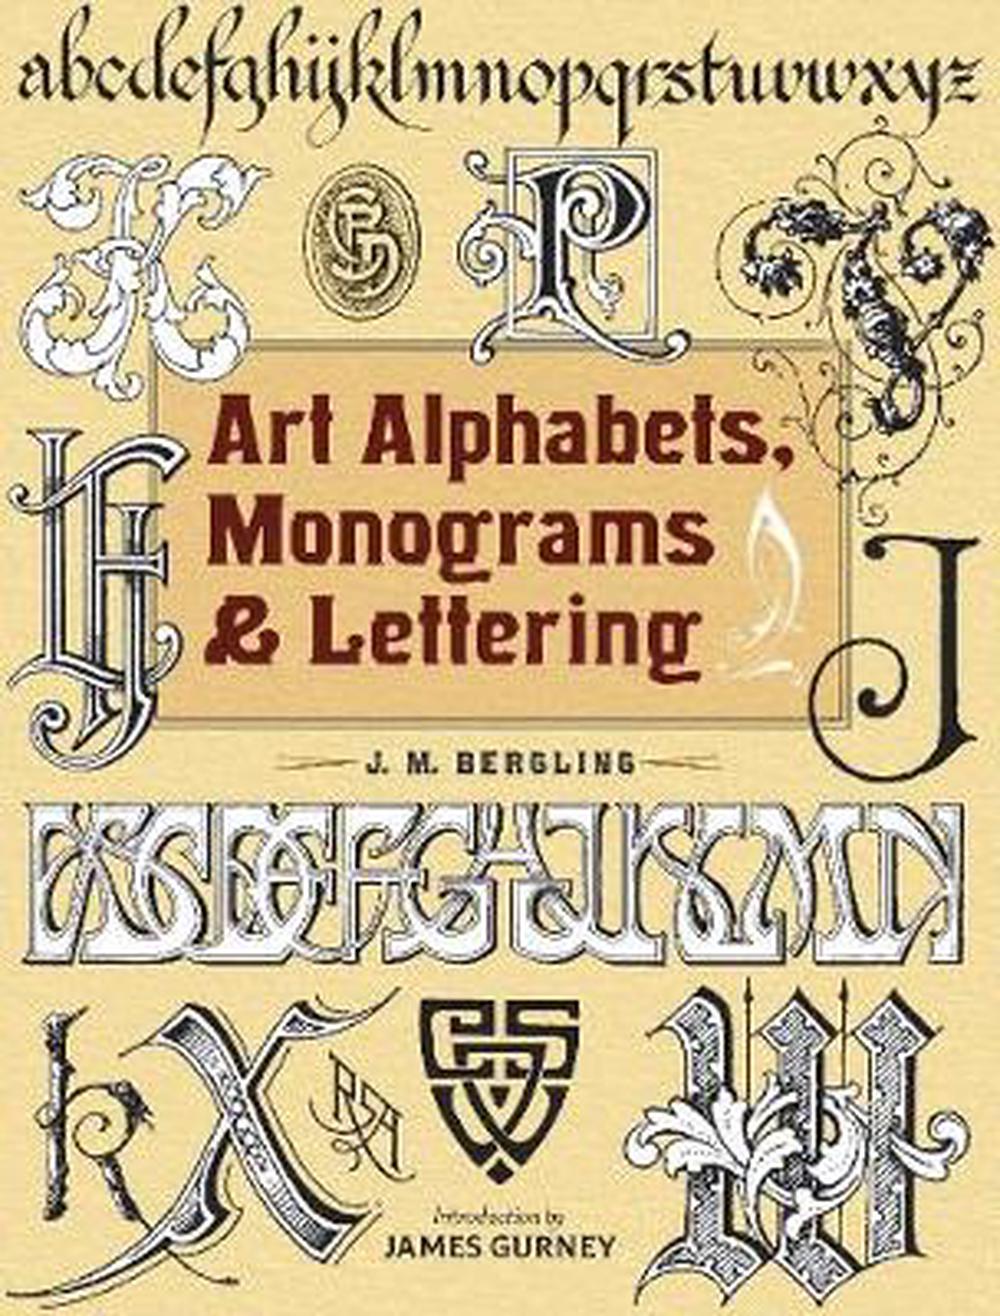 Art Alphabets and Lettering by J.M. Bergling, Foreword by James Gurney (Signed)